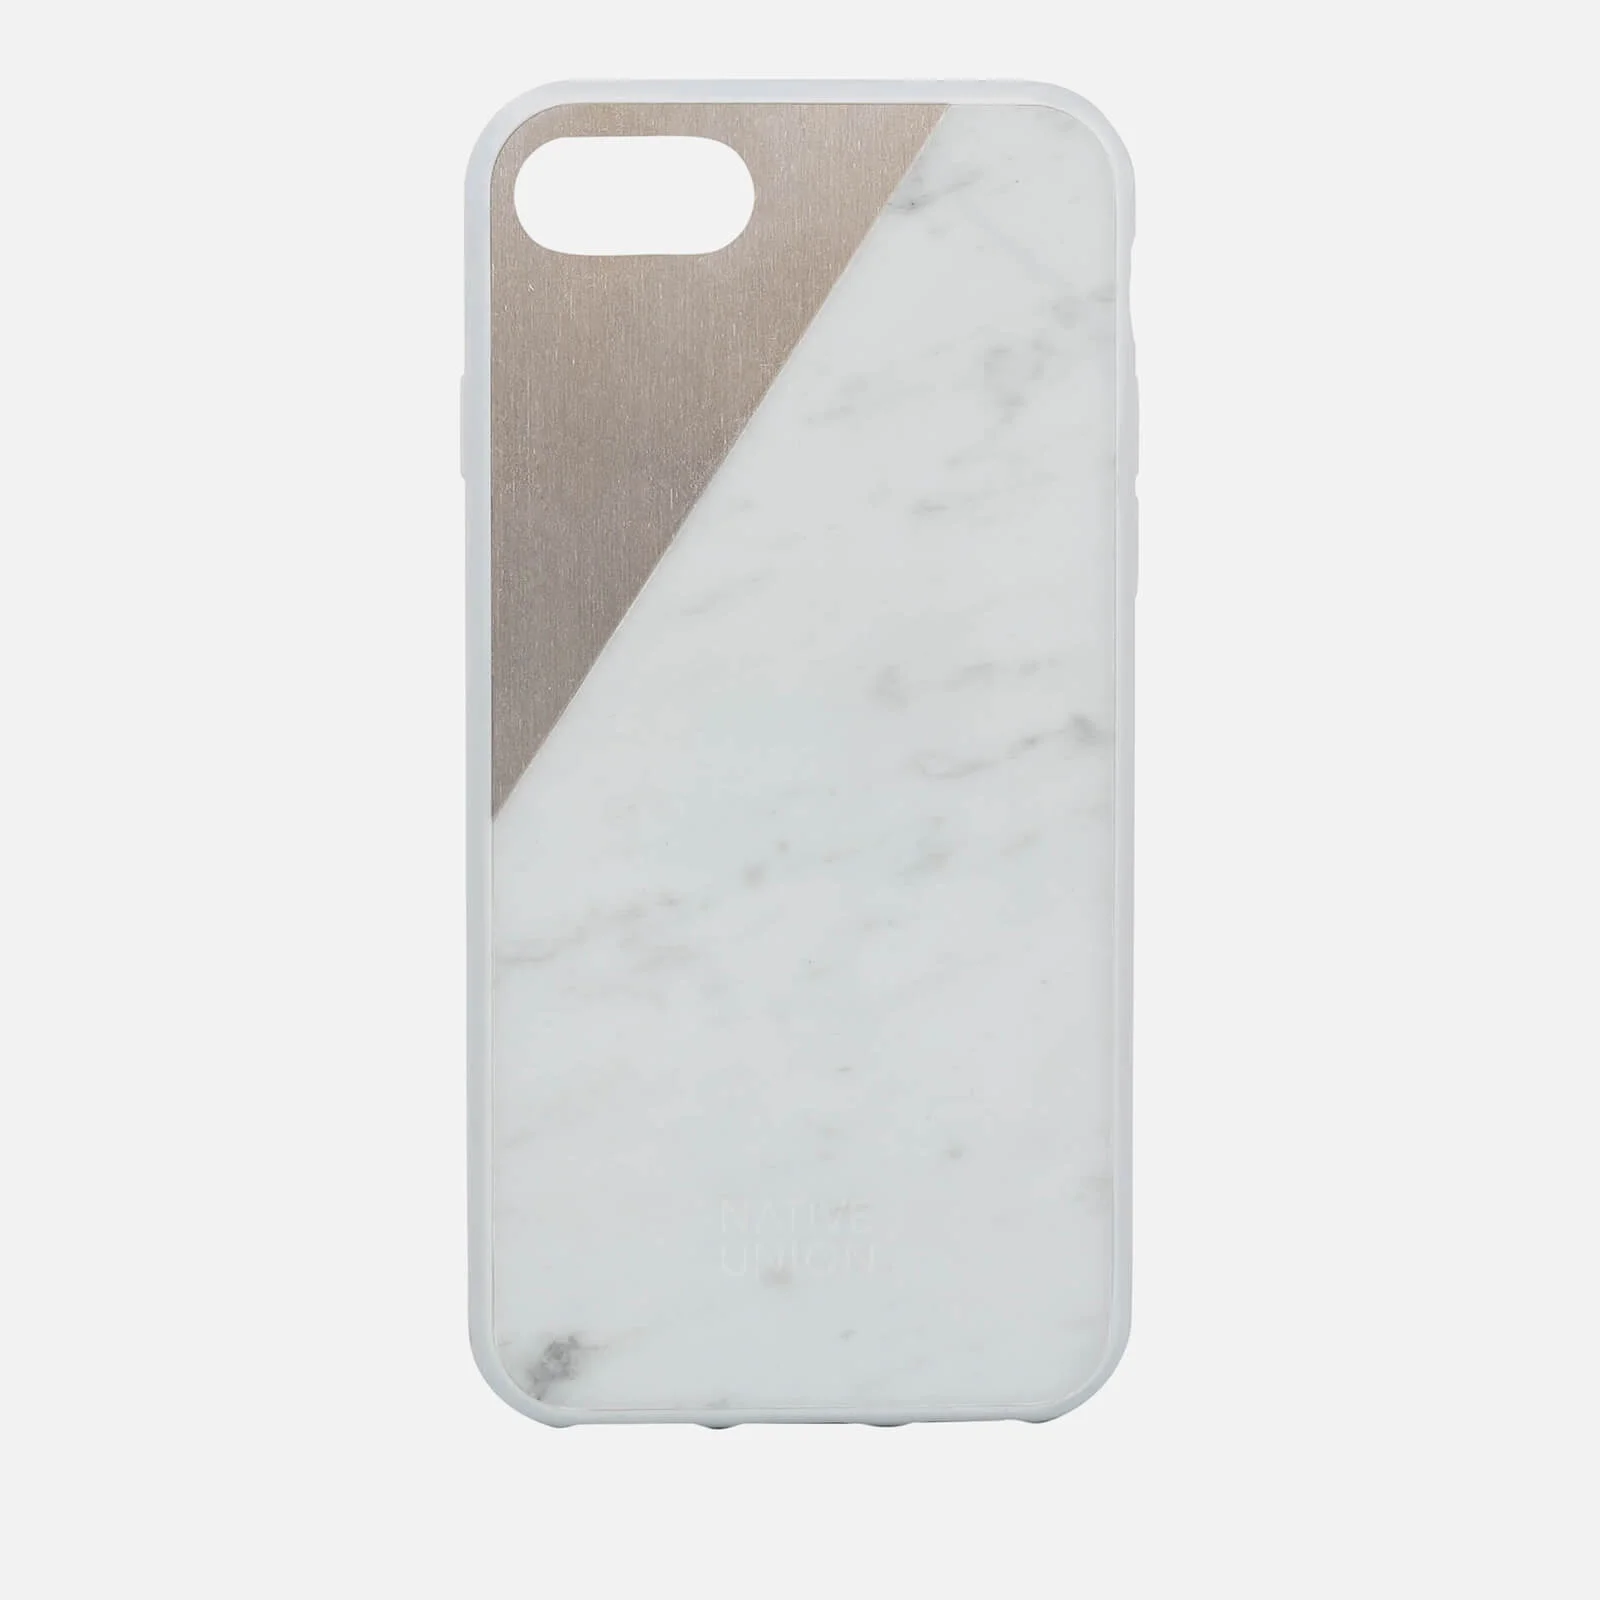 Native Union Clic Marble Metal iPhone 7 Case - White/Gold Image 1